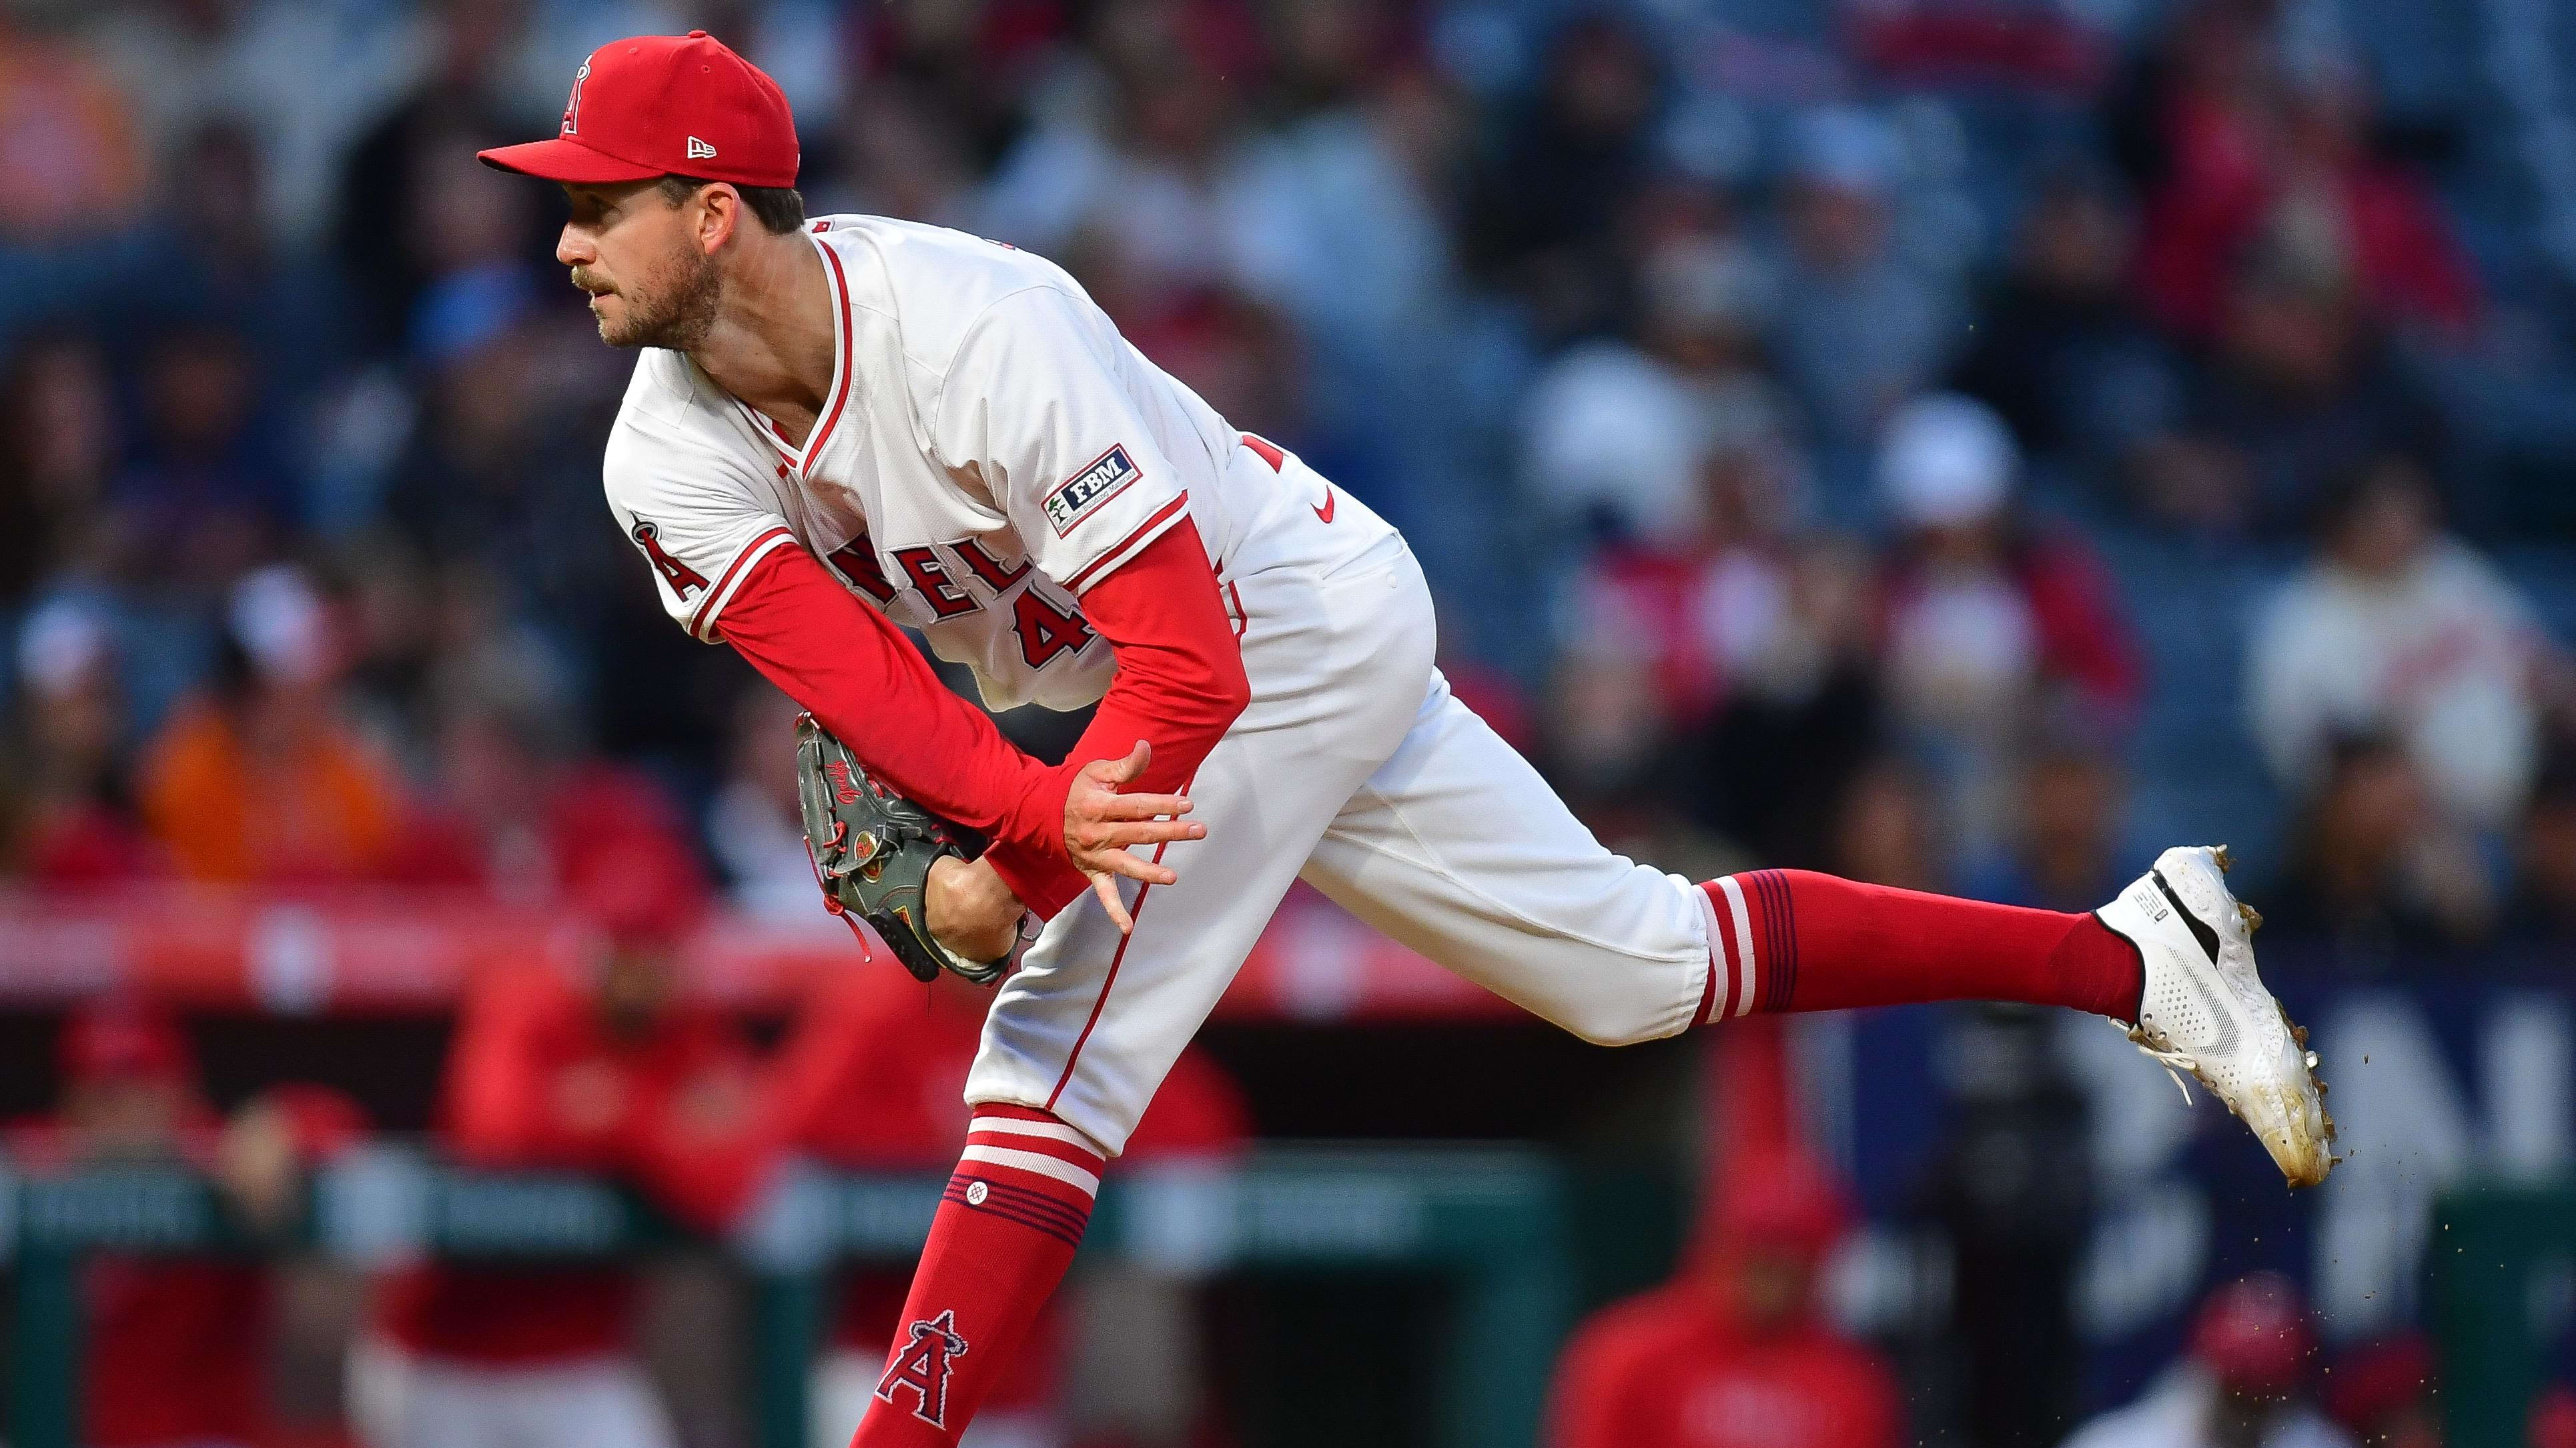 Griffin Canning Opens Up About Mistake Pitch That Cost Angels Game vs Cleveland